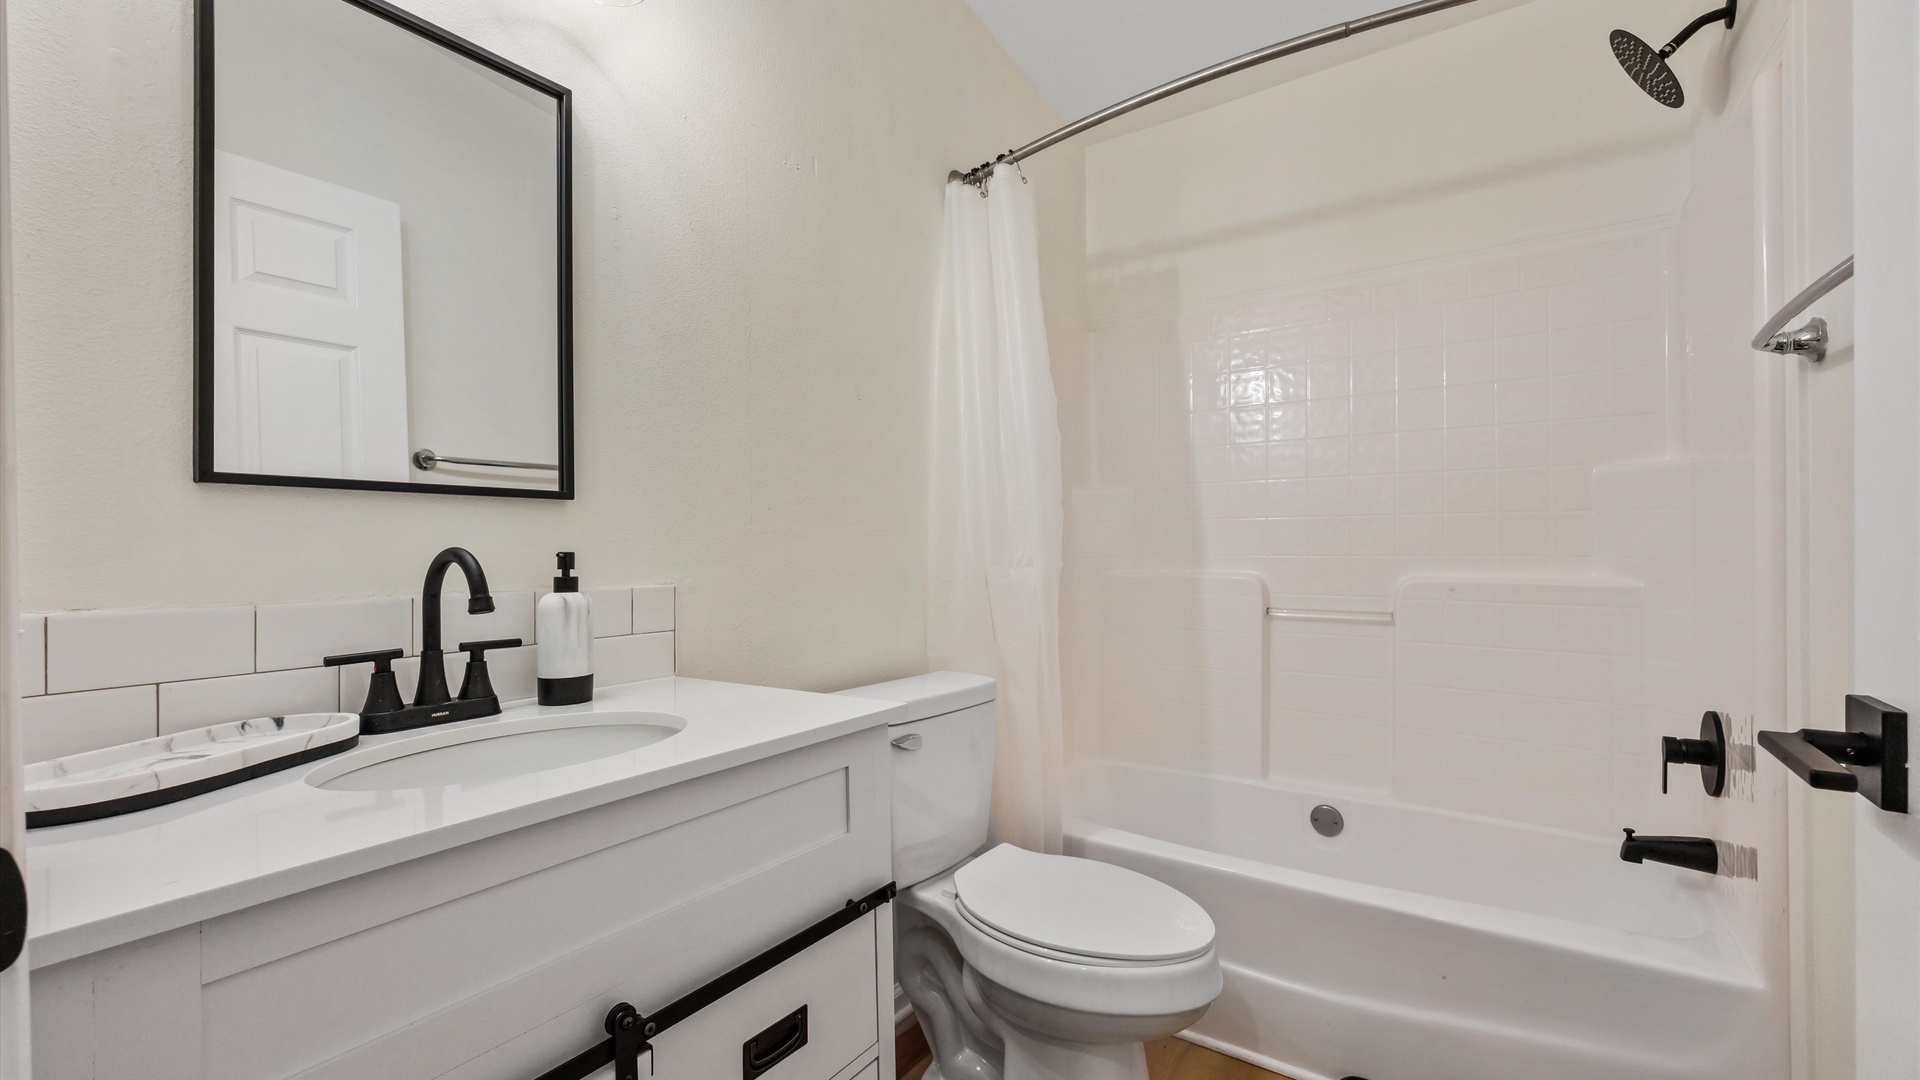 The shared full bathroom includes a single vanity & shower/tub combo